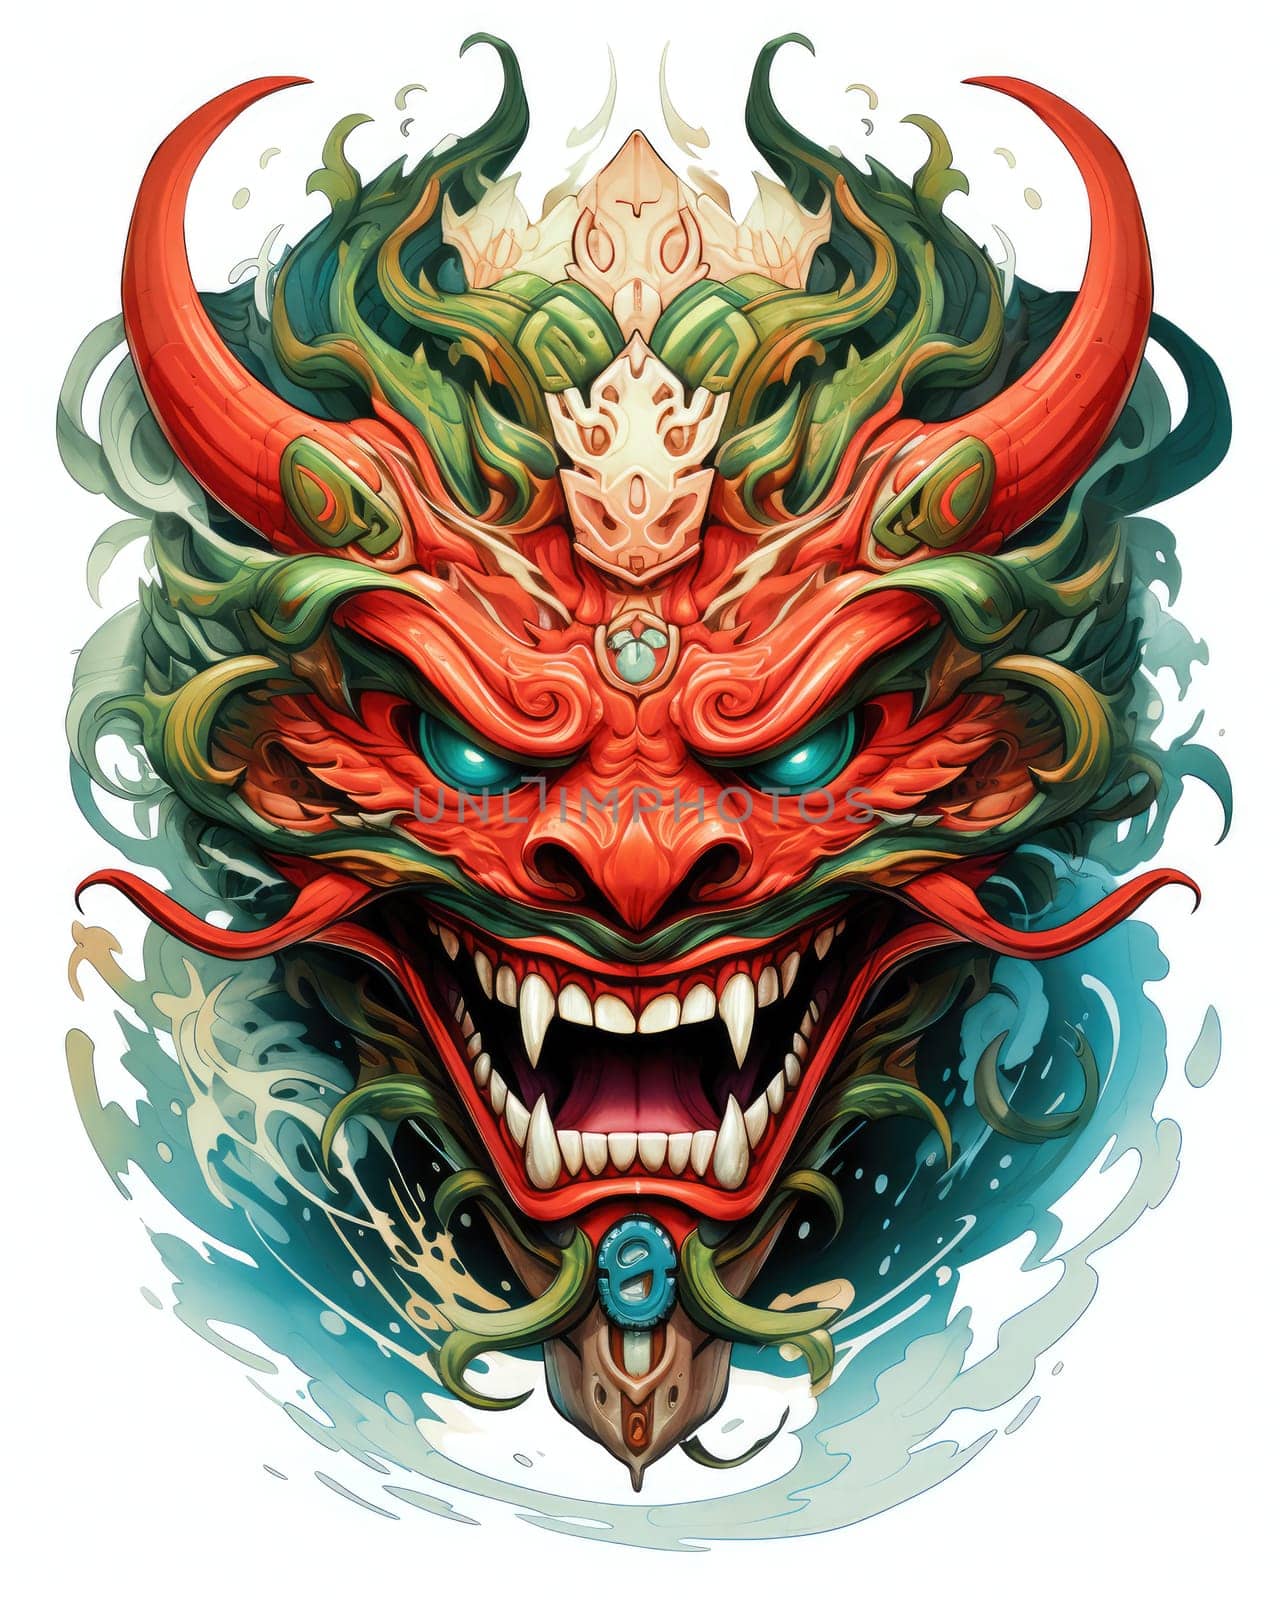 Ethnic mask of evil head. Decorative portrait of mystical demon in traditional ethnic oriental style